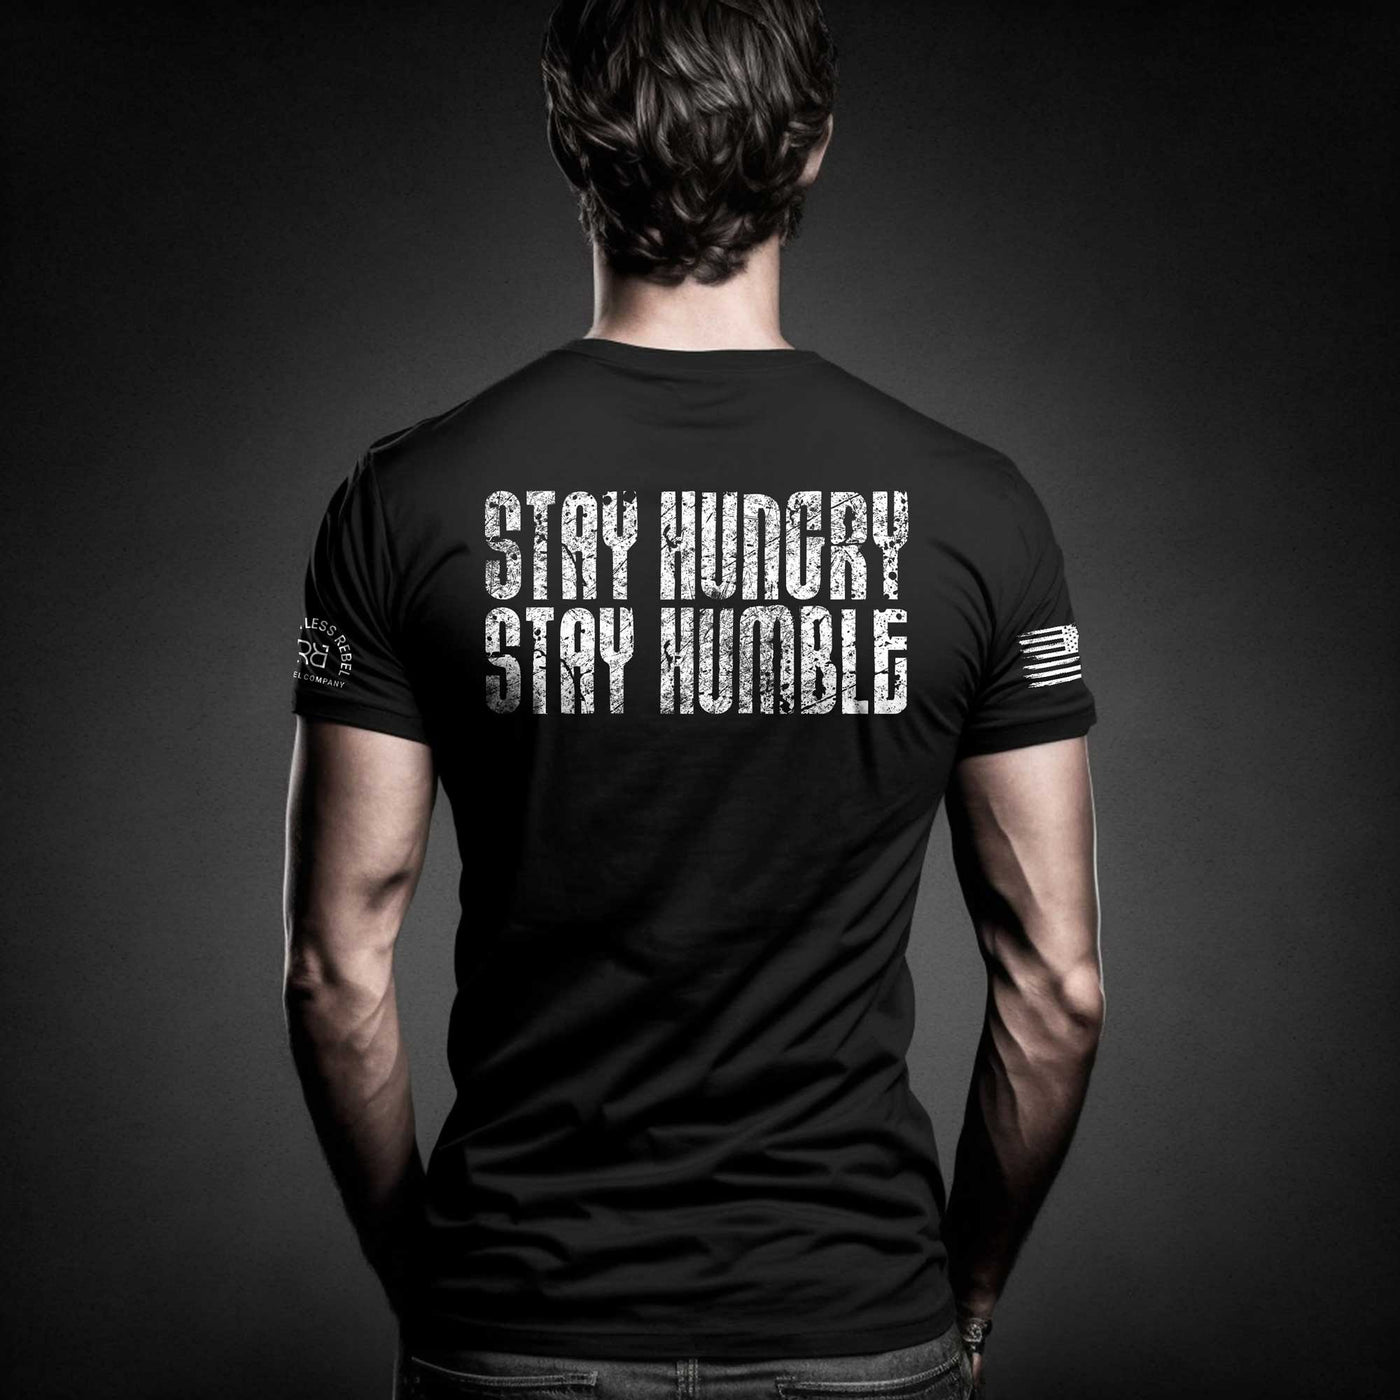 Stay Hungry Stay Humble | Red | Premium Men's Tee